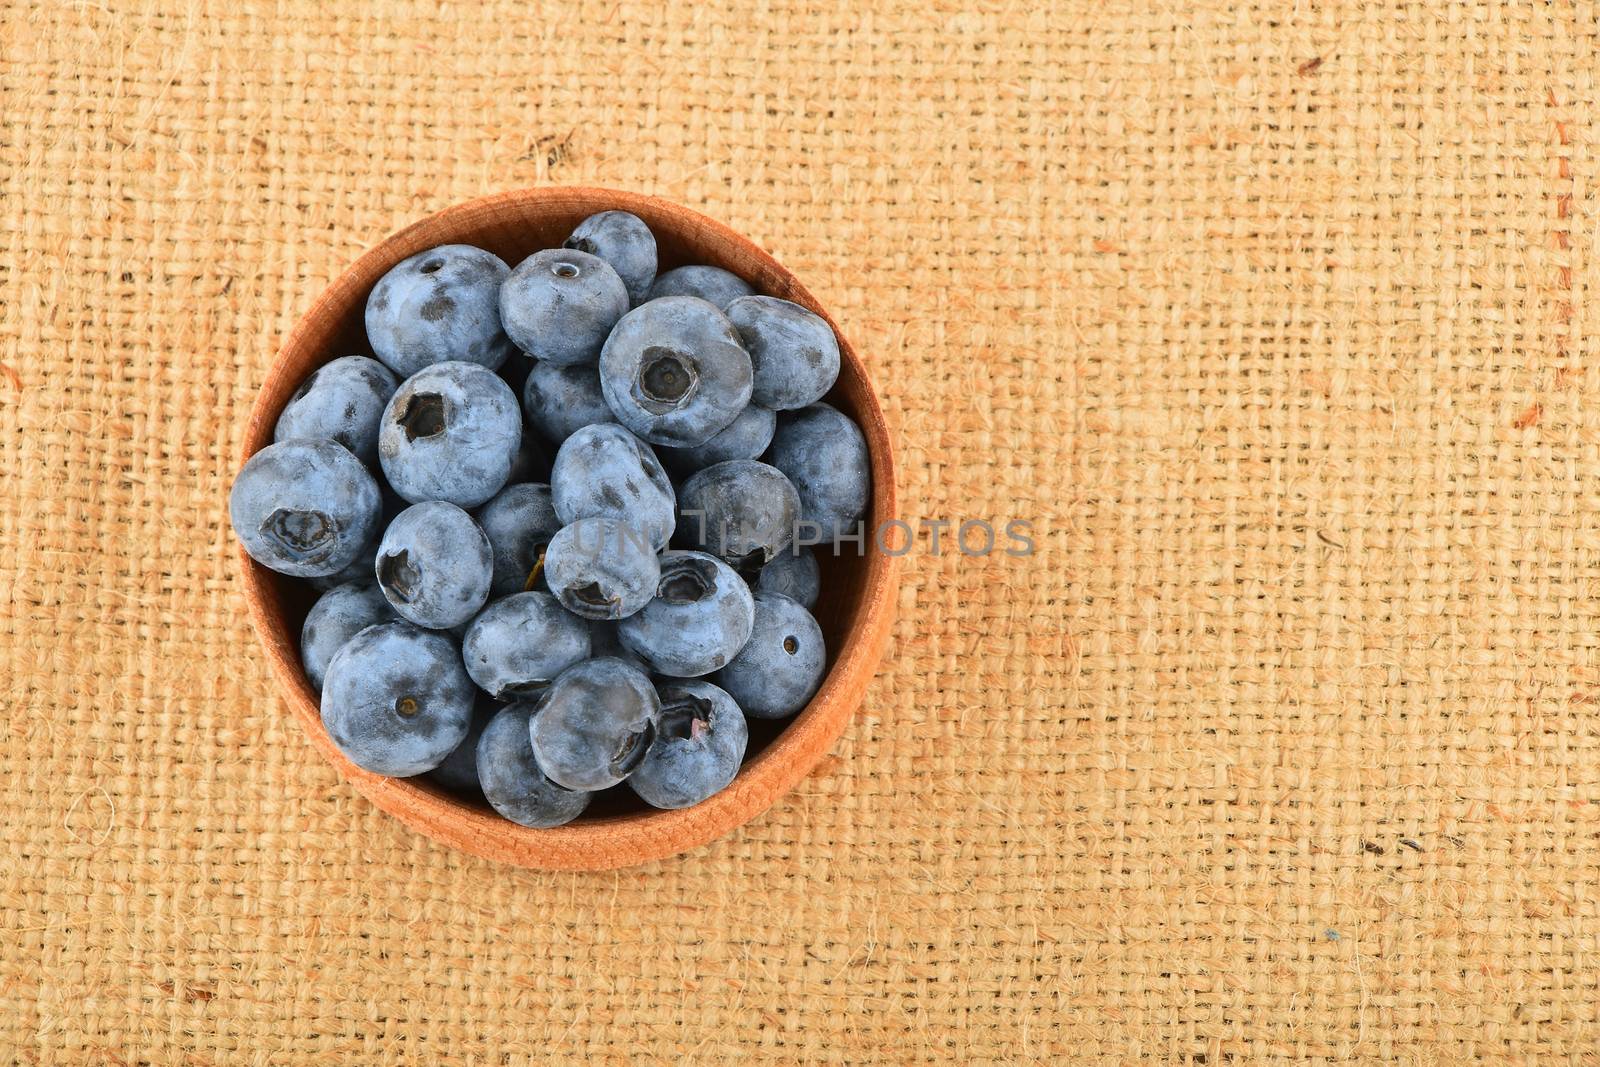 Handful of blueberries in wooden bowl on canvas by BreakingTheWalls